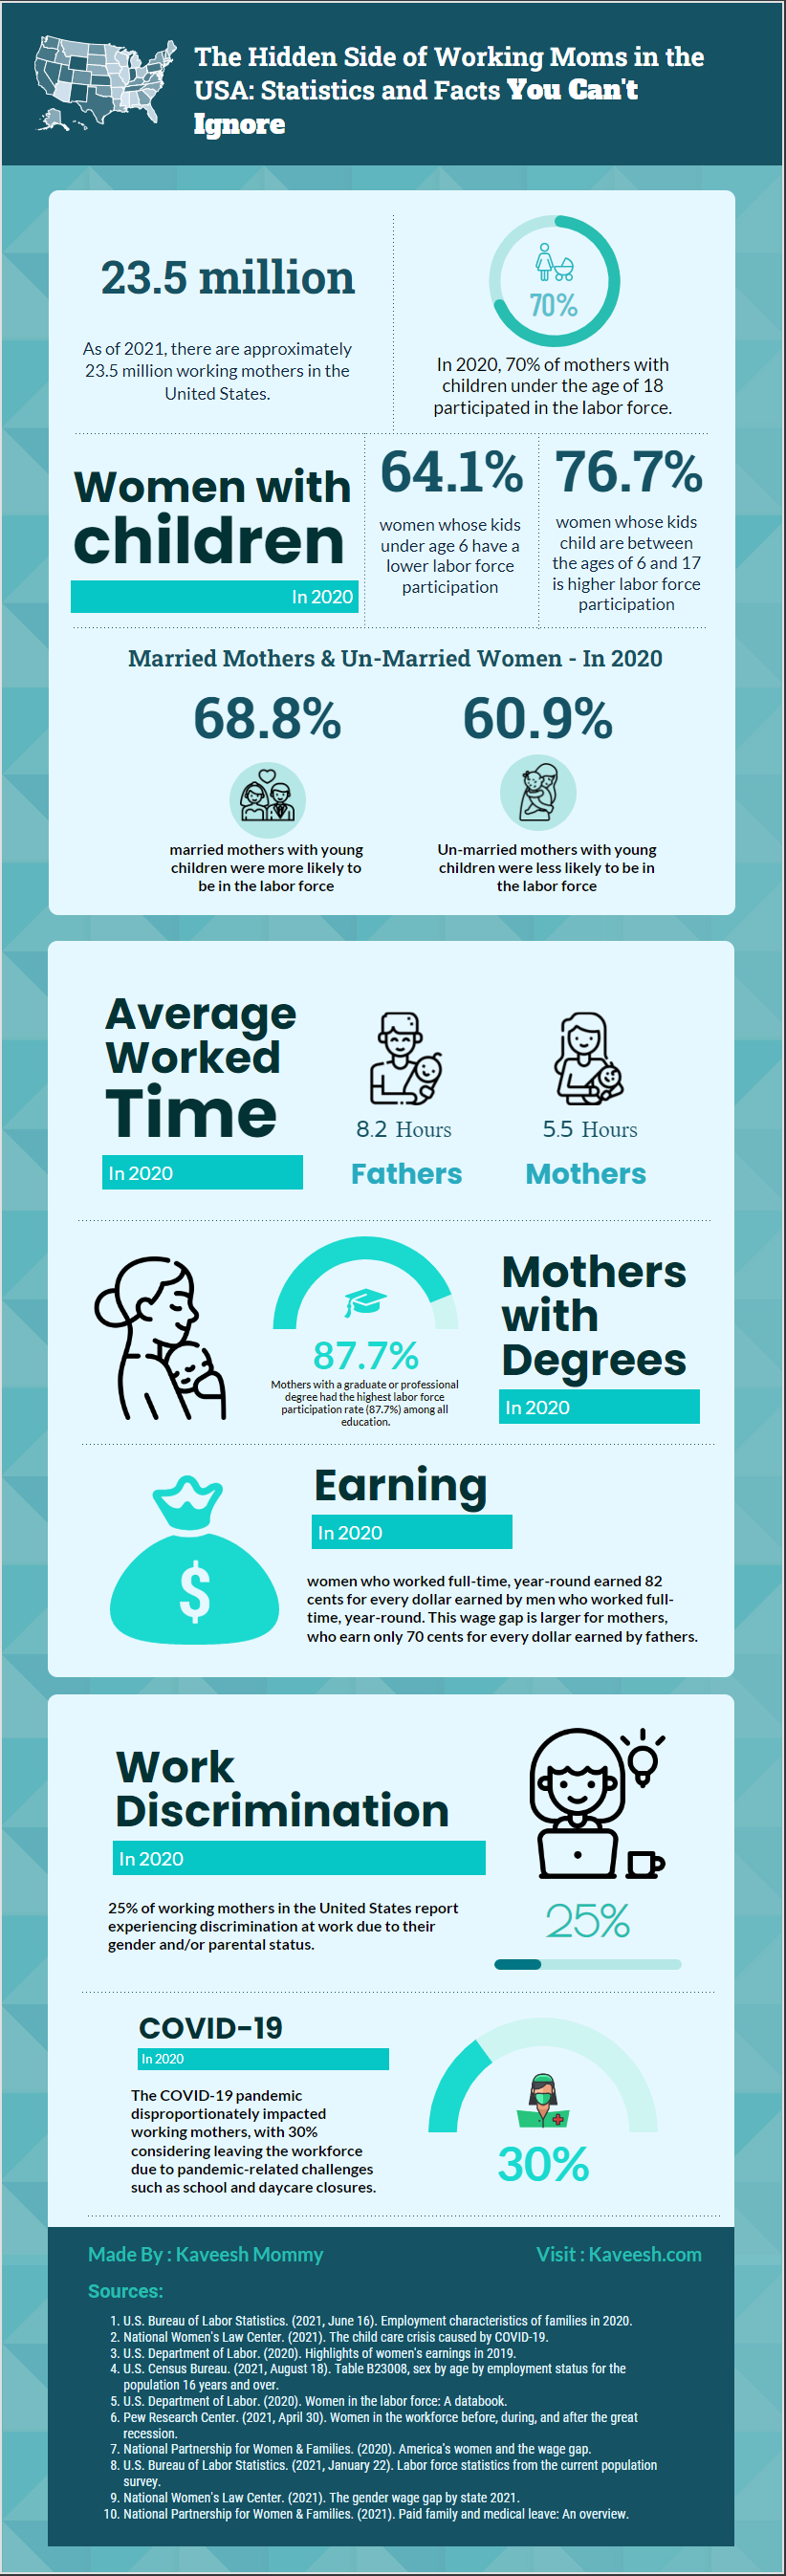 Infographic depicting statistics on working mothers in the USA, including the number of working mothers (23.5 million), labor force participation rates, and differences in participation rates based on age of children and marital status.